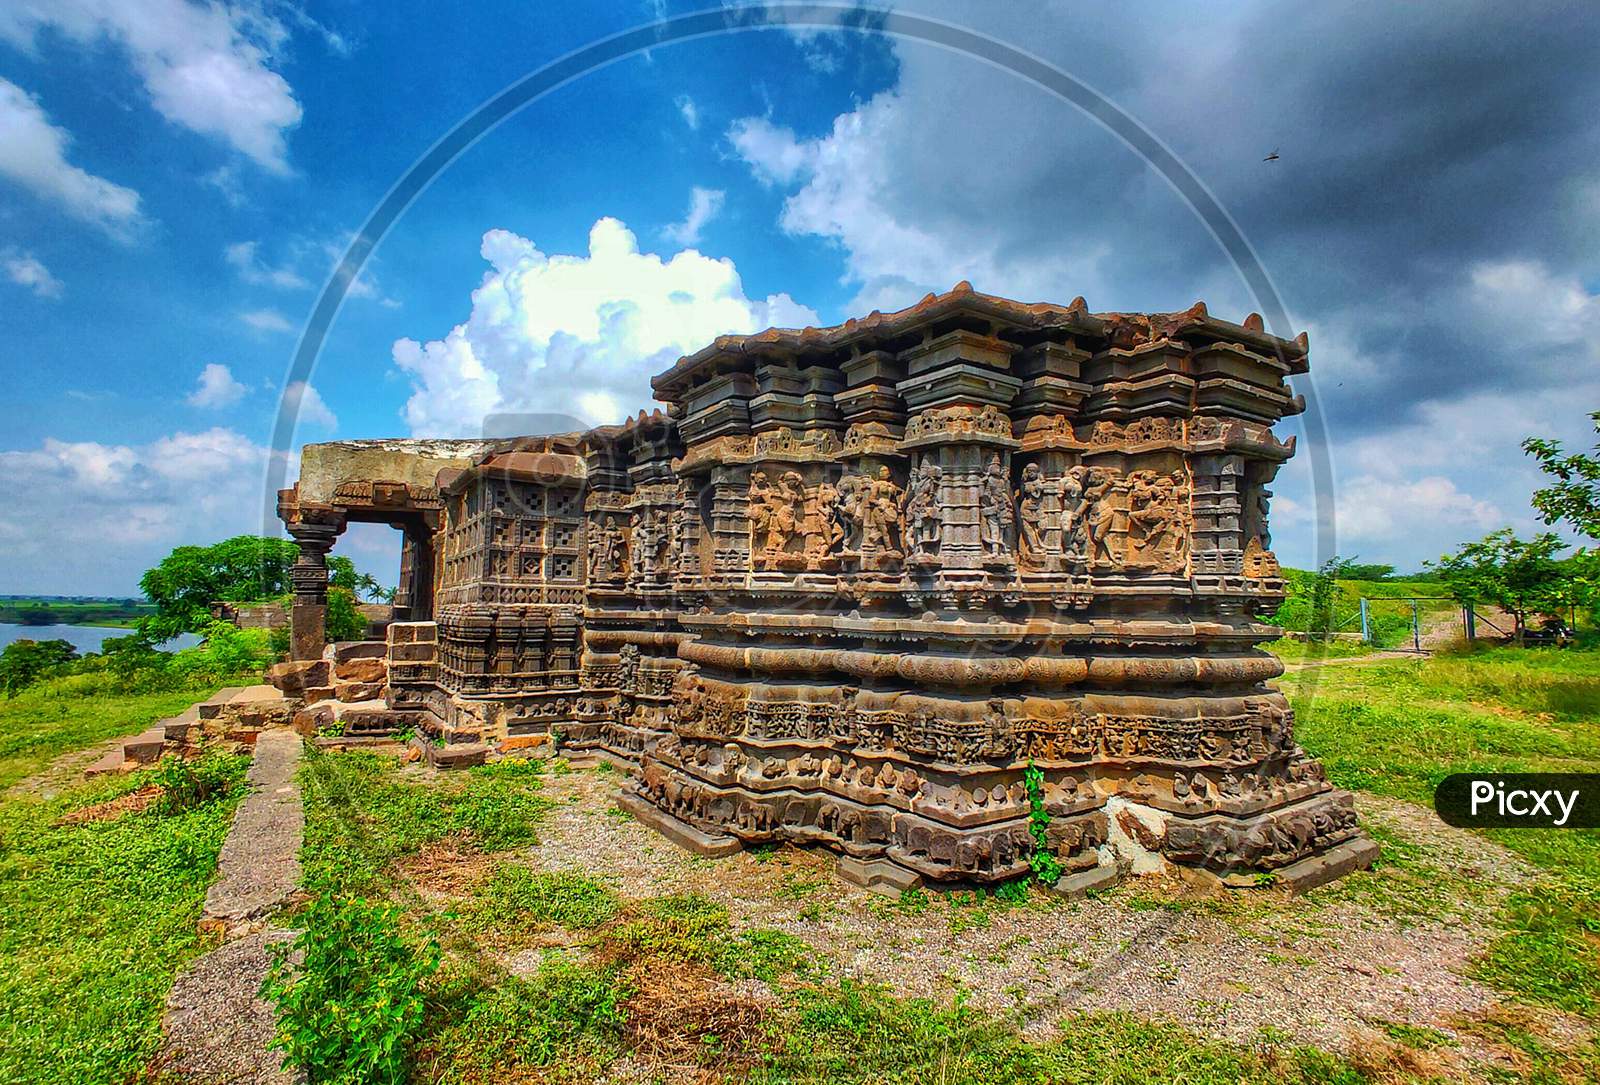 Architecture Of An Ancient Hindu Temple